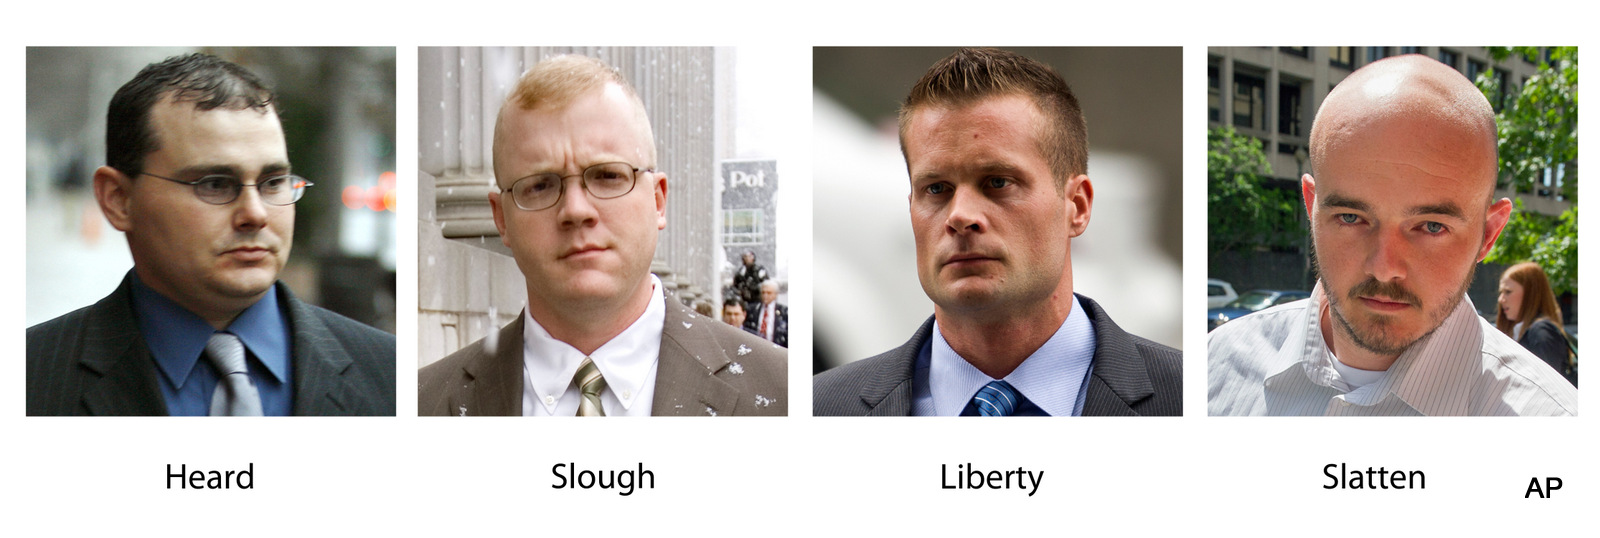 Blackwater guards, from left, Dustin Heard, Paul Slough, Evan Liberty and Nicholas Slatten. A years-long legal fight over a deadly mass shooting of civilians in an Iraq war zone reaches its reckoning point, when four former Blackwater security guards are sentenced for the rampage. Three of the guards, Dustin Heard, Evan Liberty and Paul Slough, face mandatory decades-long sentences because of firearms convictions. A fourth, Nicholas Slatten, faces a penalty of life in prison after being found guilty of first-degree murder. 